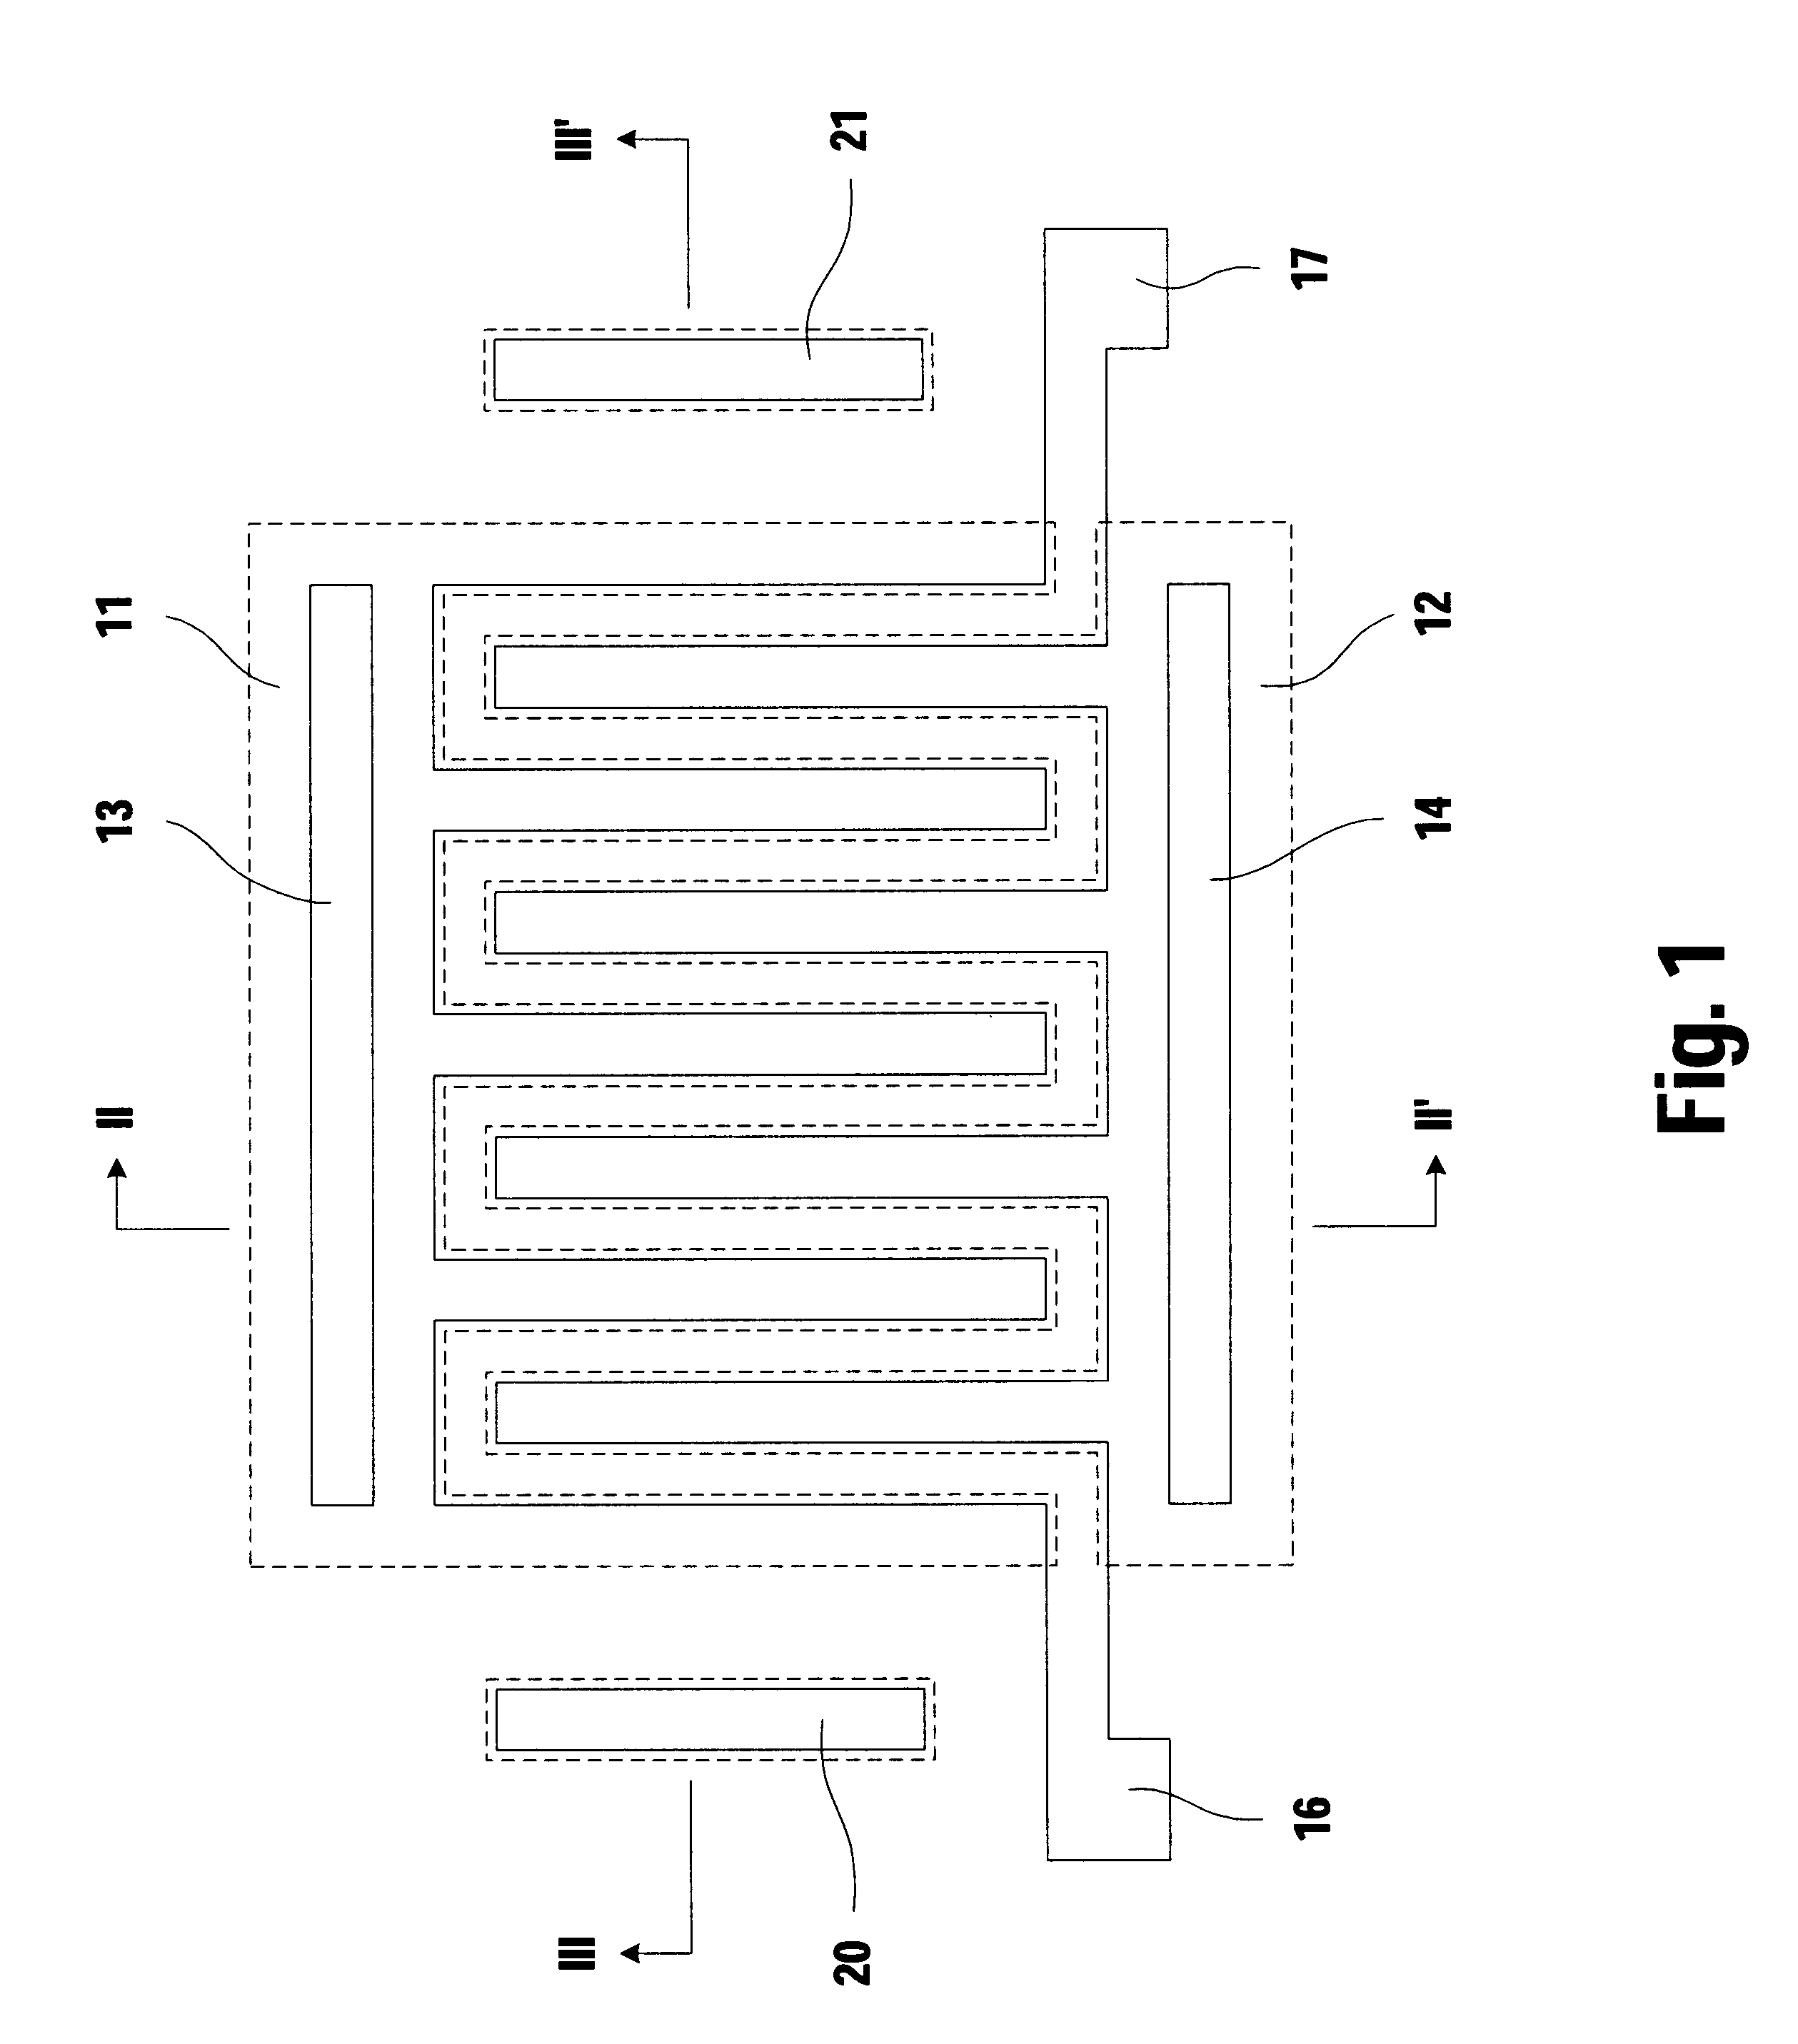 Mobile ionic contamination detection in manufacture of semiconductor devices